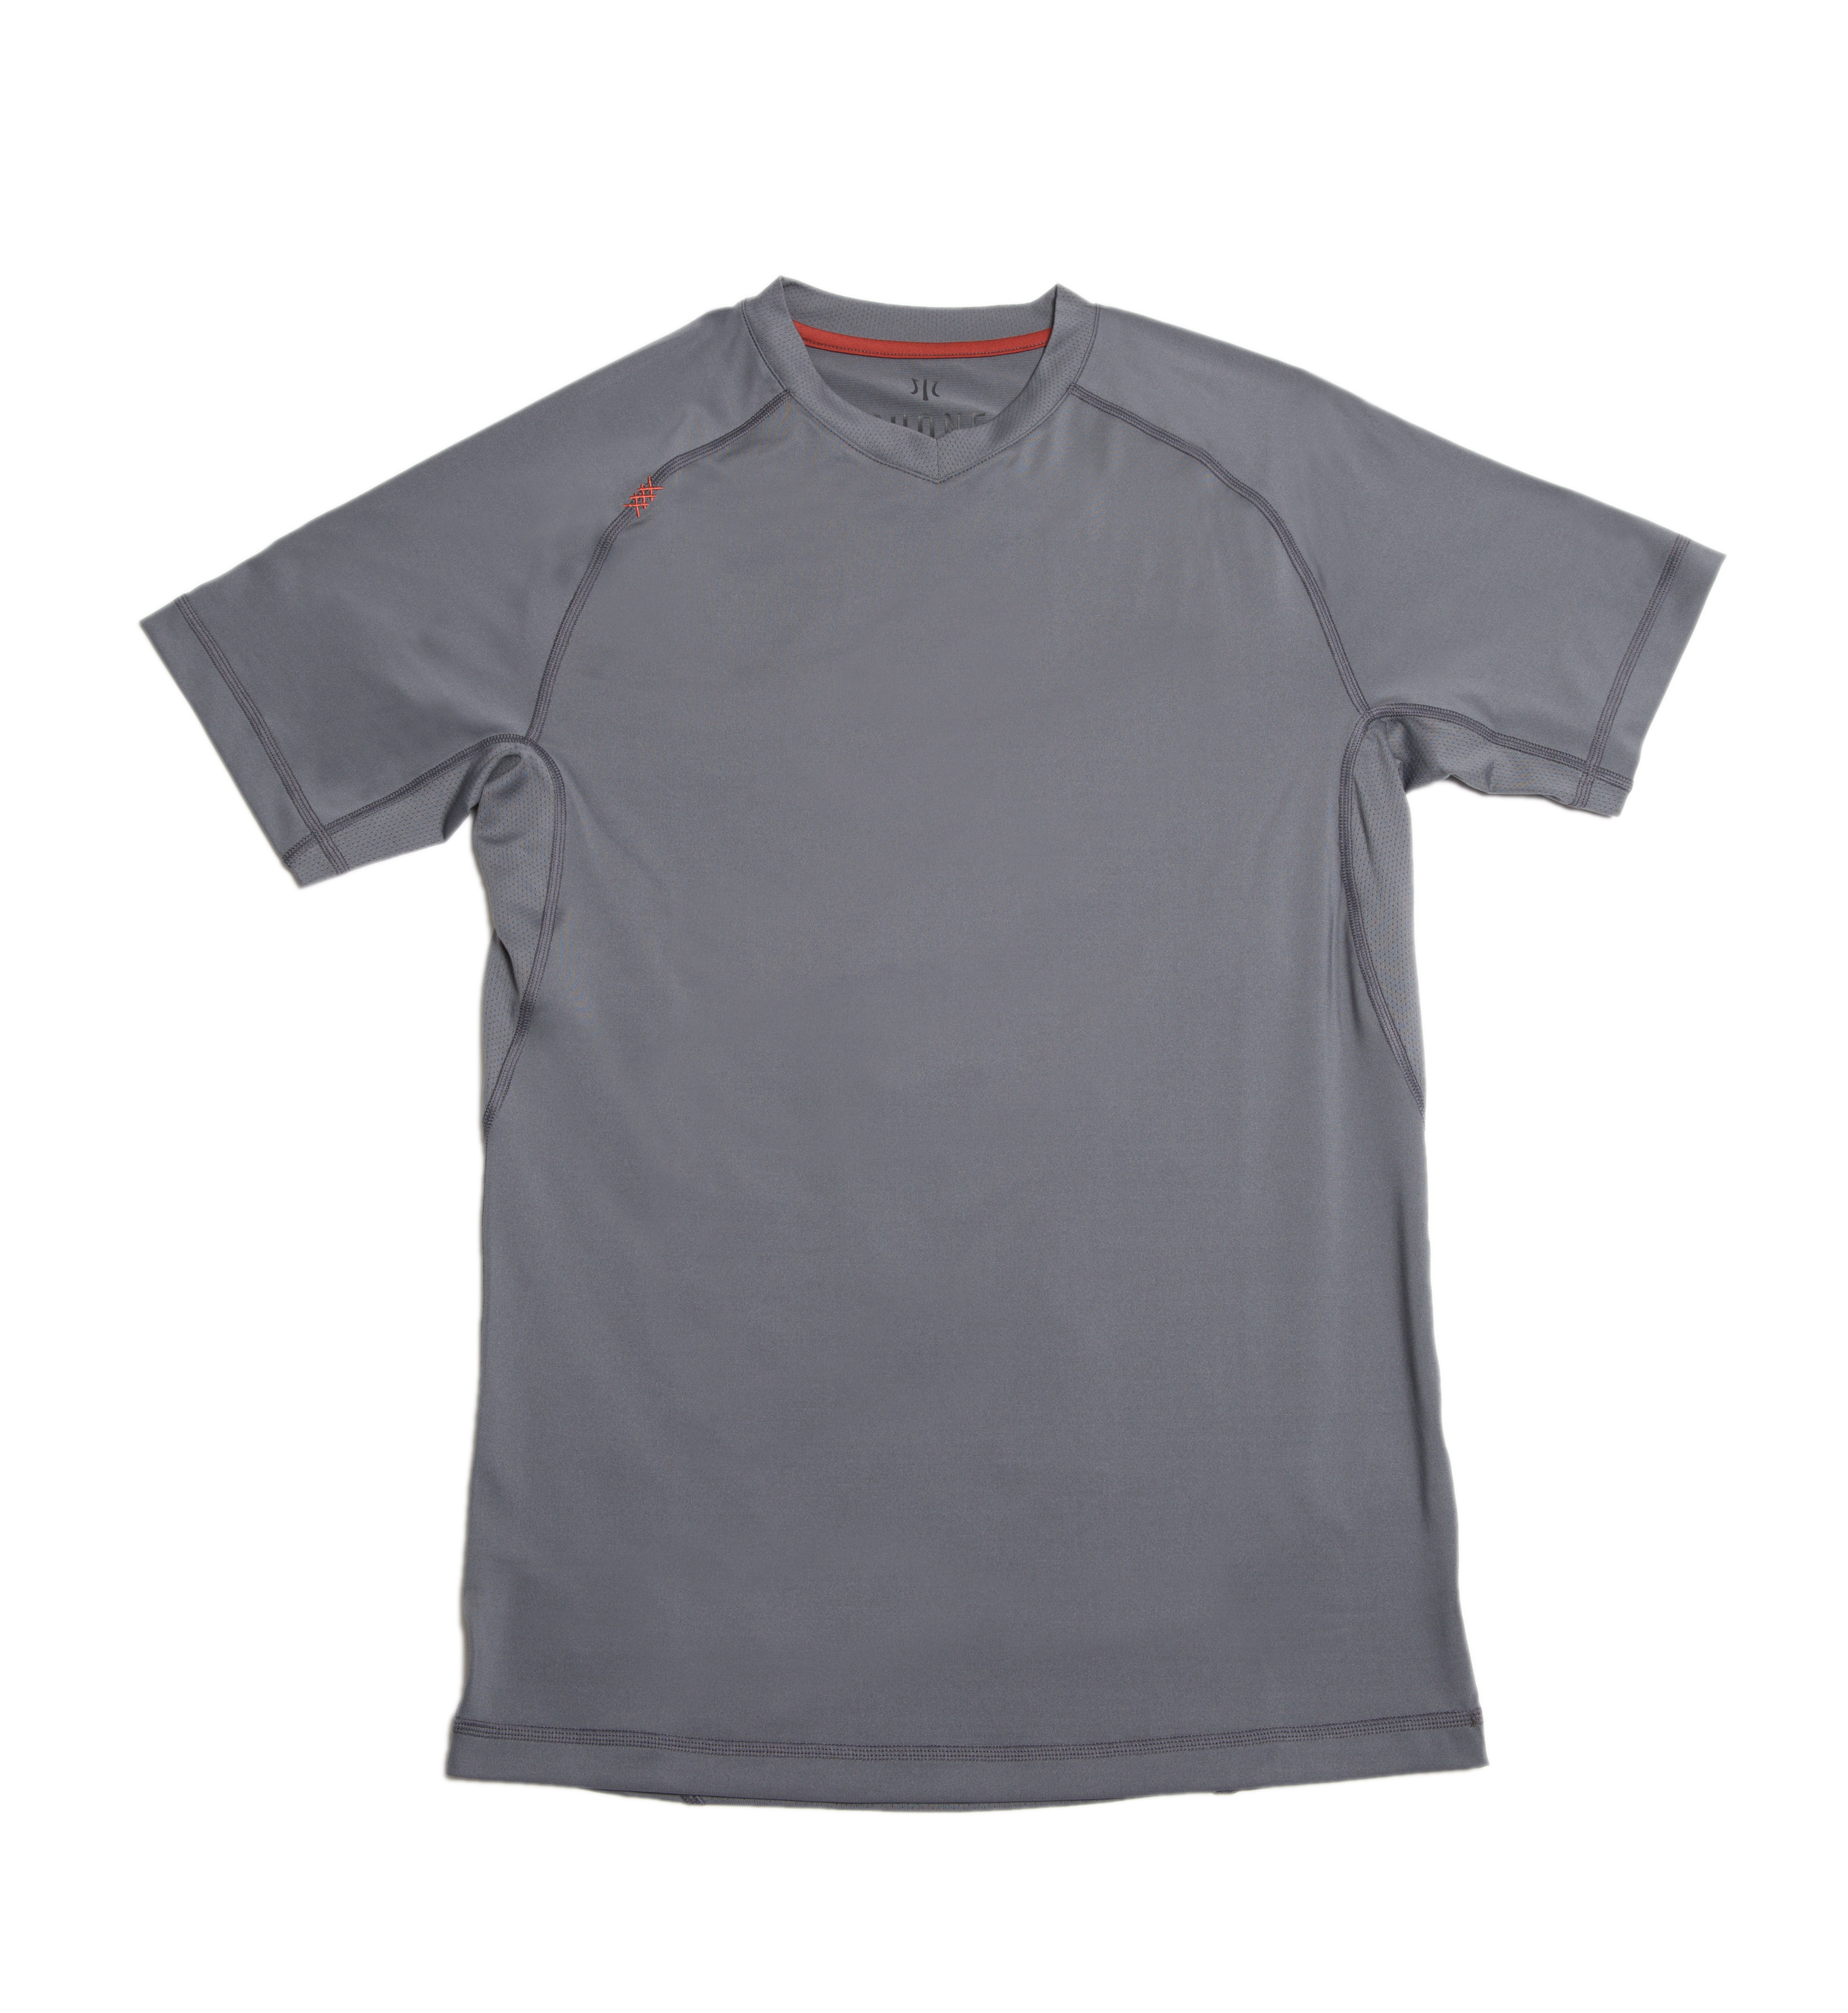 Rhone Apparel Activewear Fights Odor and Sweat Stains | Complex